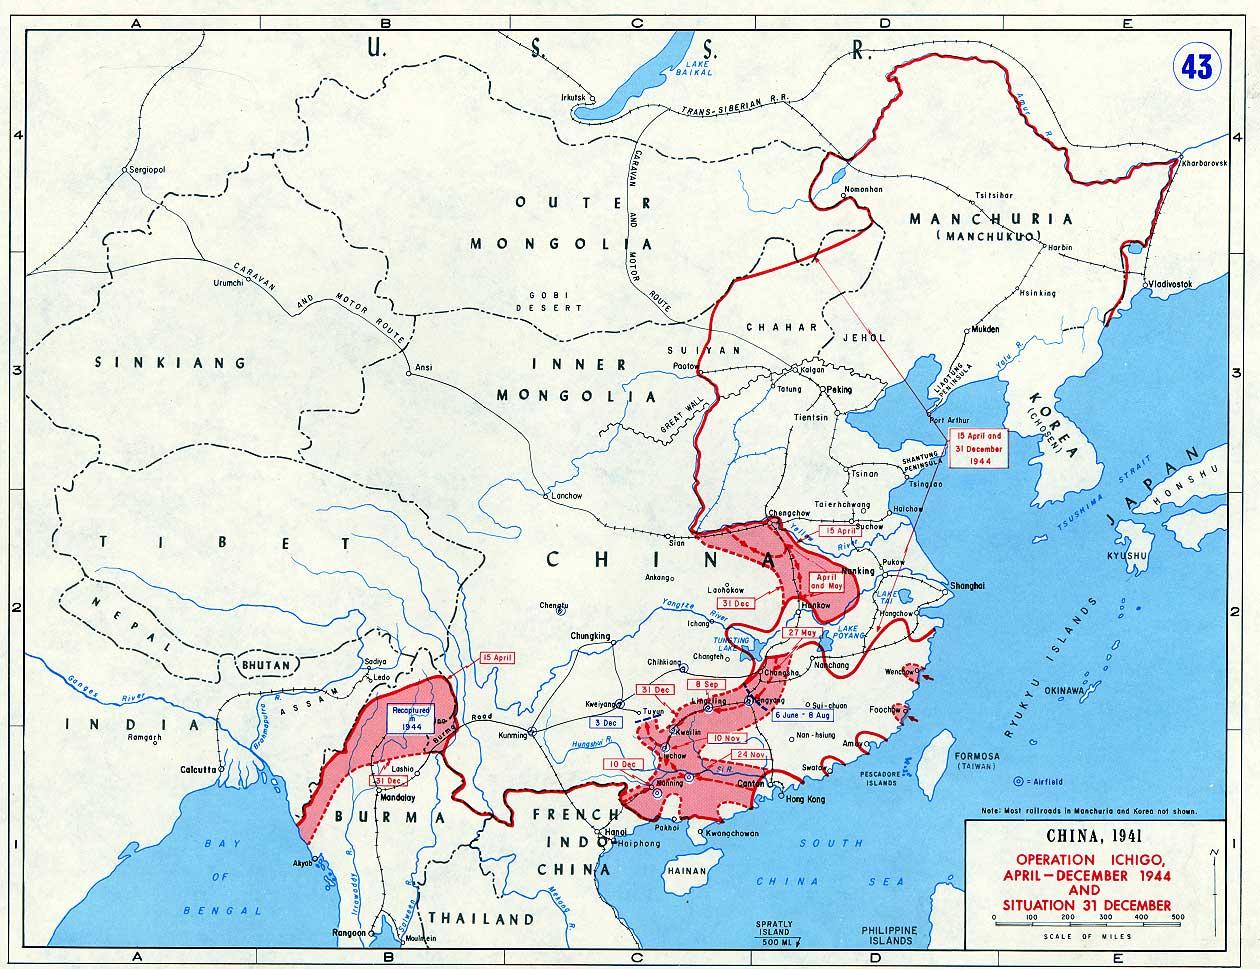 Map of the Japanese Operation Ichigo offensive in China, Apr-Dec 1944